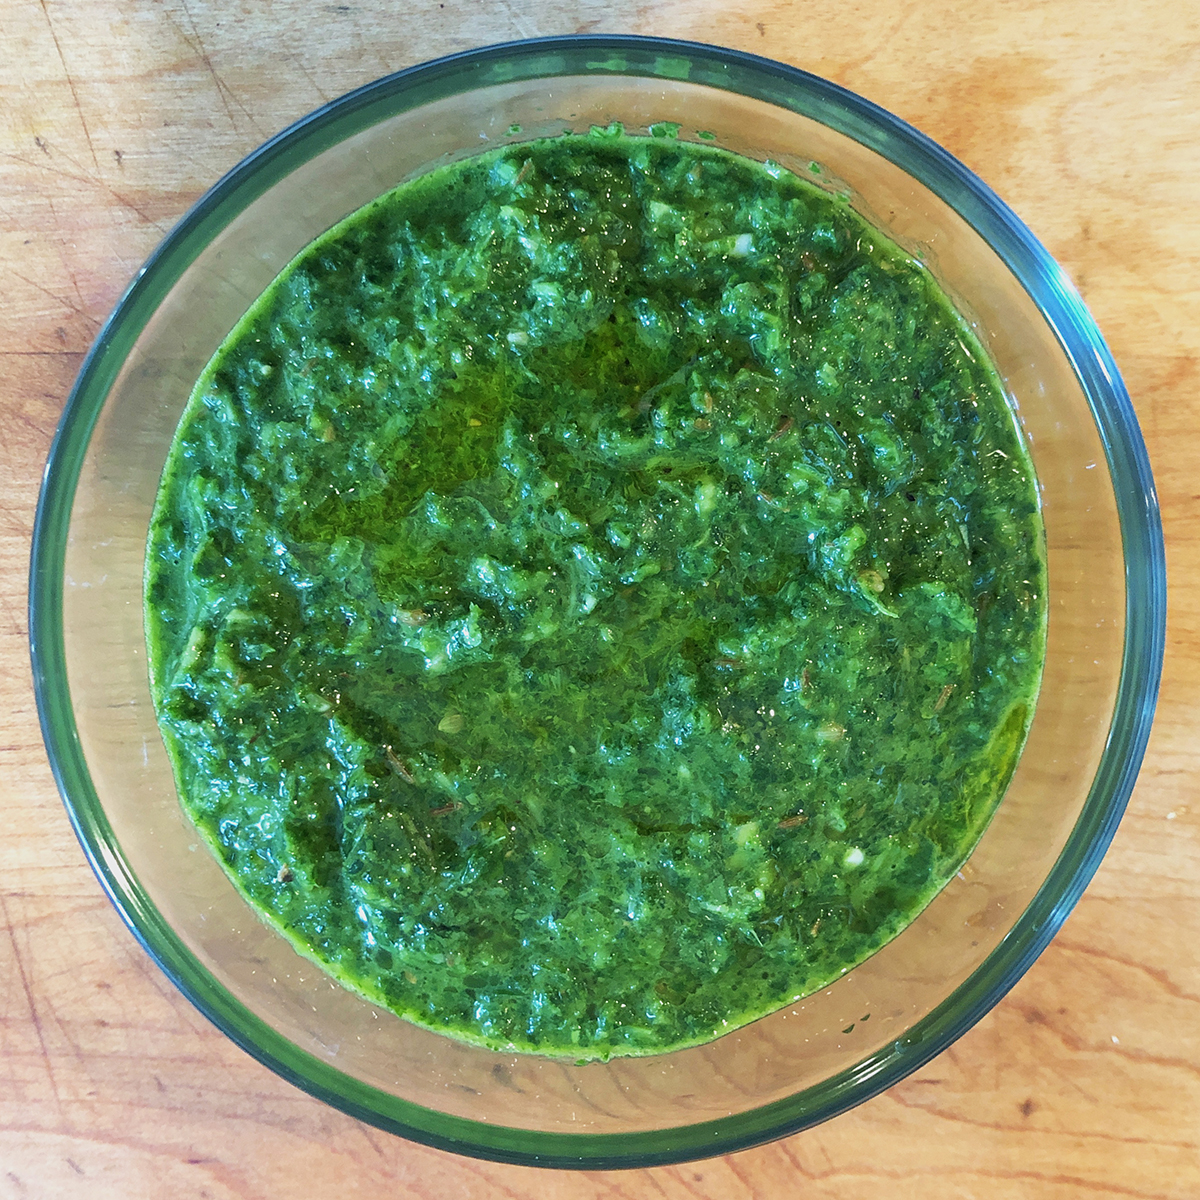 Green Shug Hot Sauce in glass bowl on wood surface